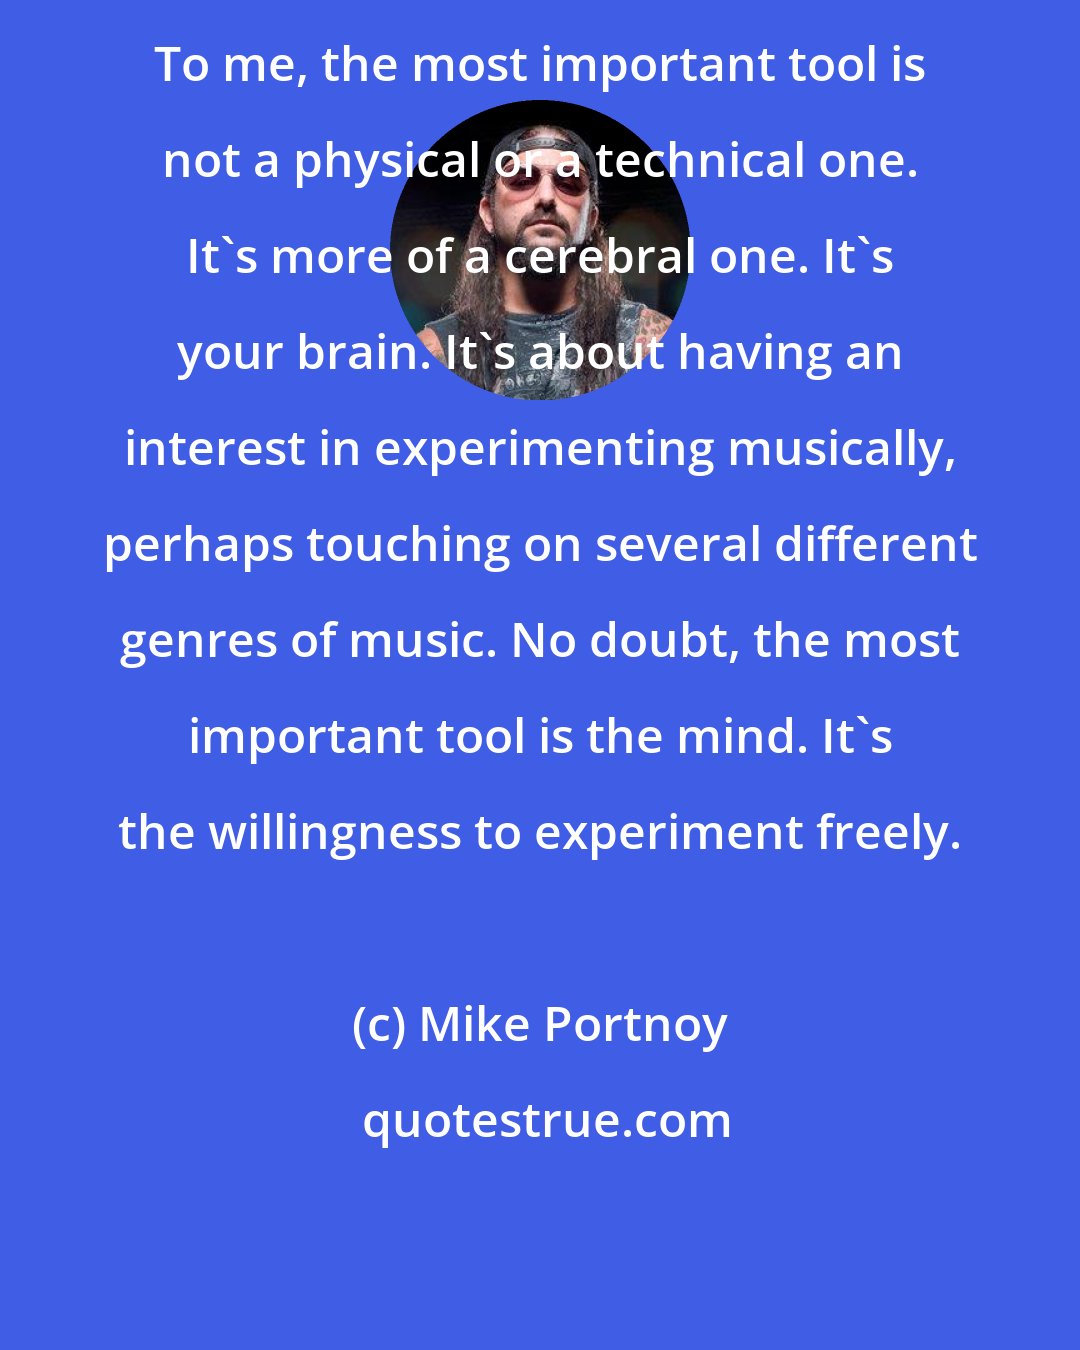 Mike Portnoy: To me, the most important tool is not a physical or a technical one. It's more of a cerebral one. It's your brain. It's about having an interest in experimenting musically, perhaps touching on several different genres of music. No doubt, the most important tool is the mind. It's the willingness to experiment freely.